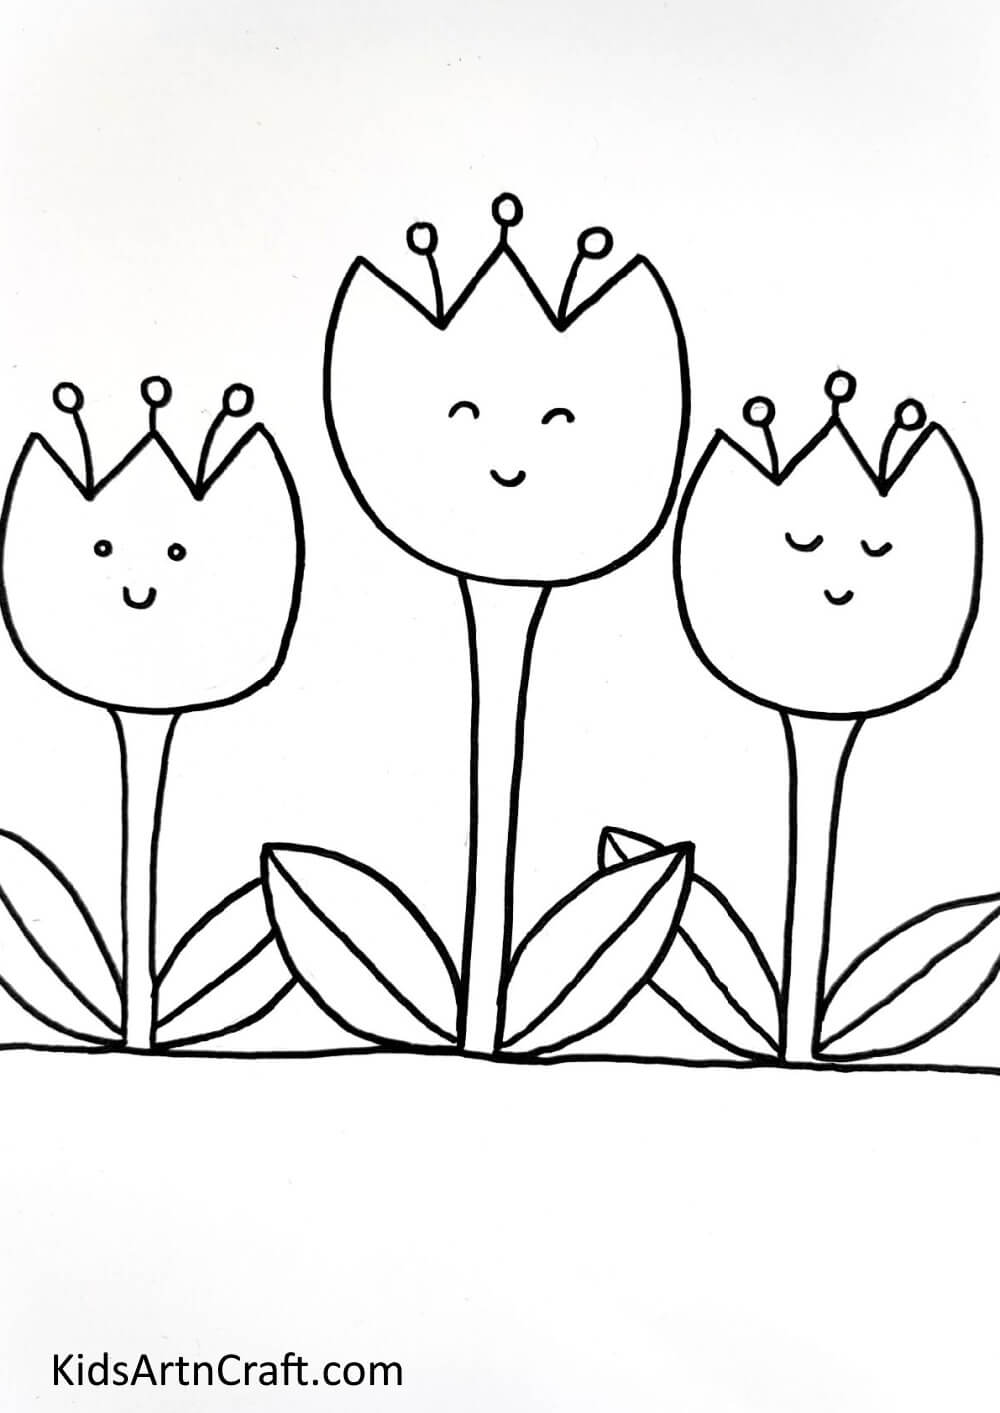 Drawing Pollens, Stems, Leaves, Eyes, And Smile - Kids can easily create tulip paintings in their own home.